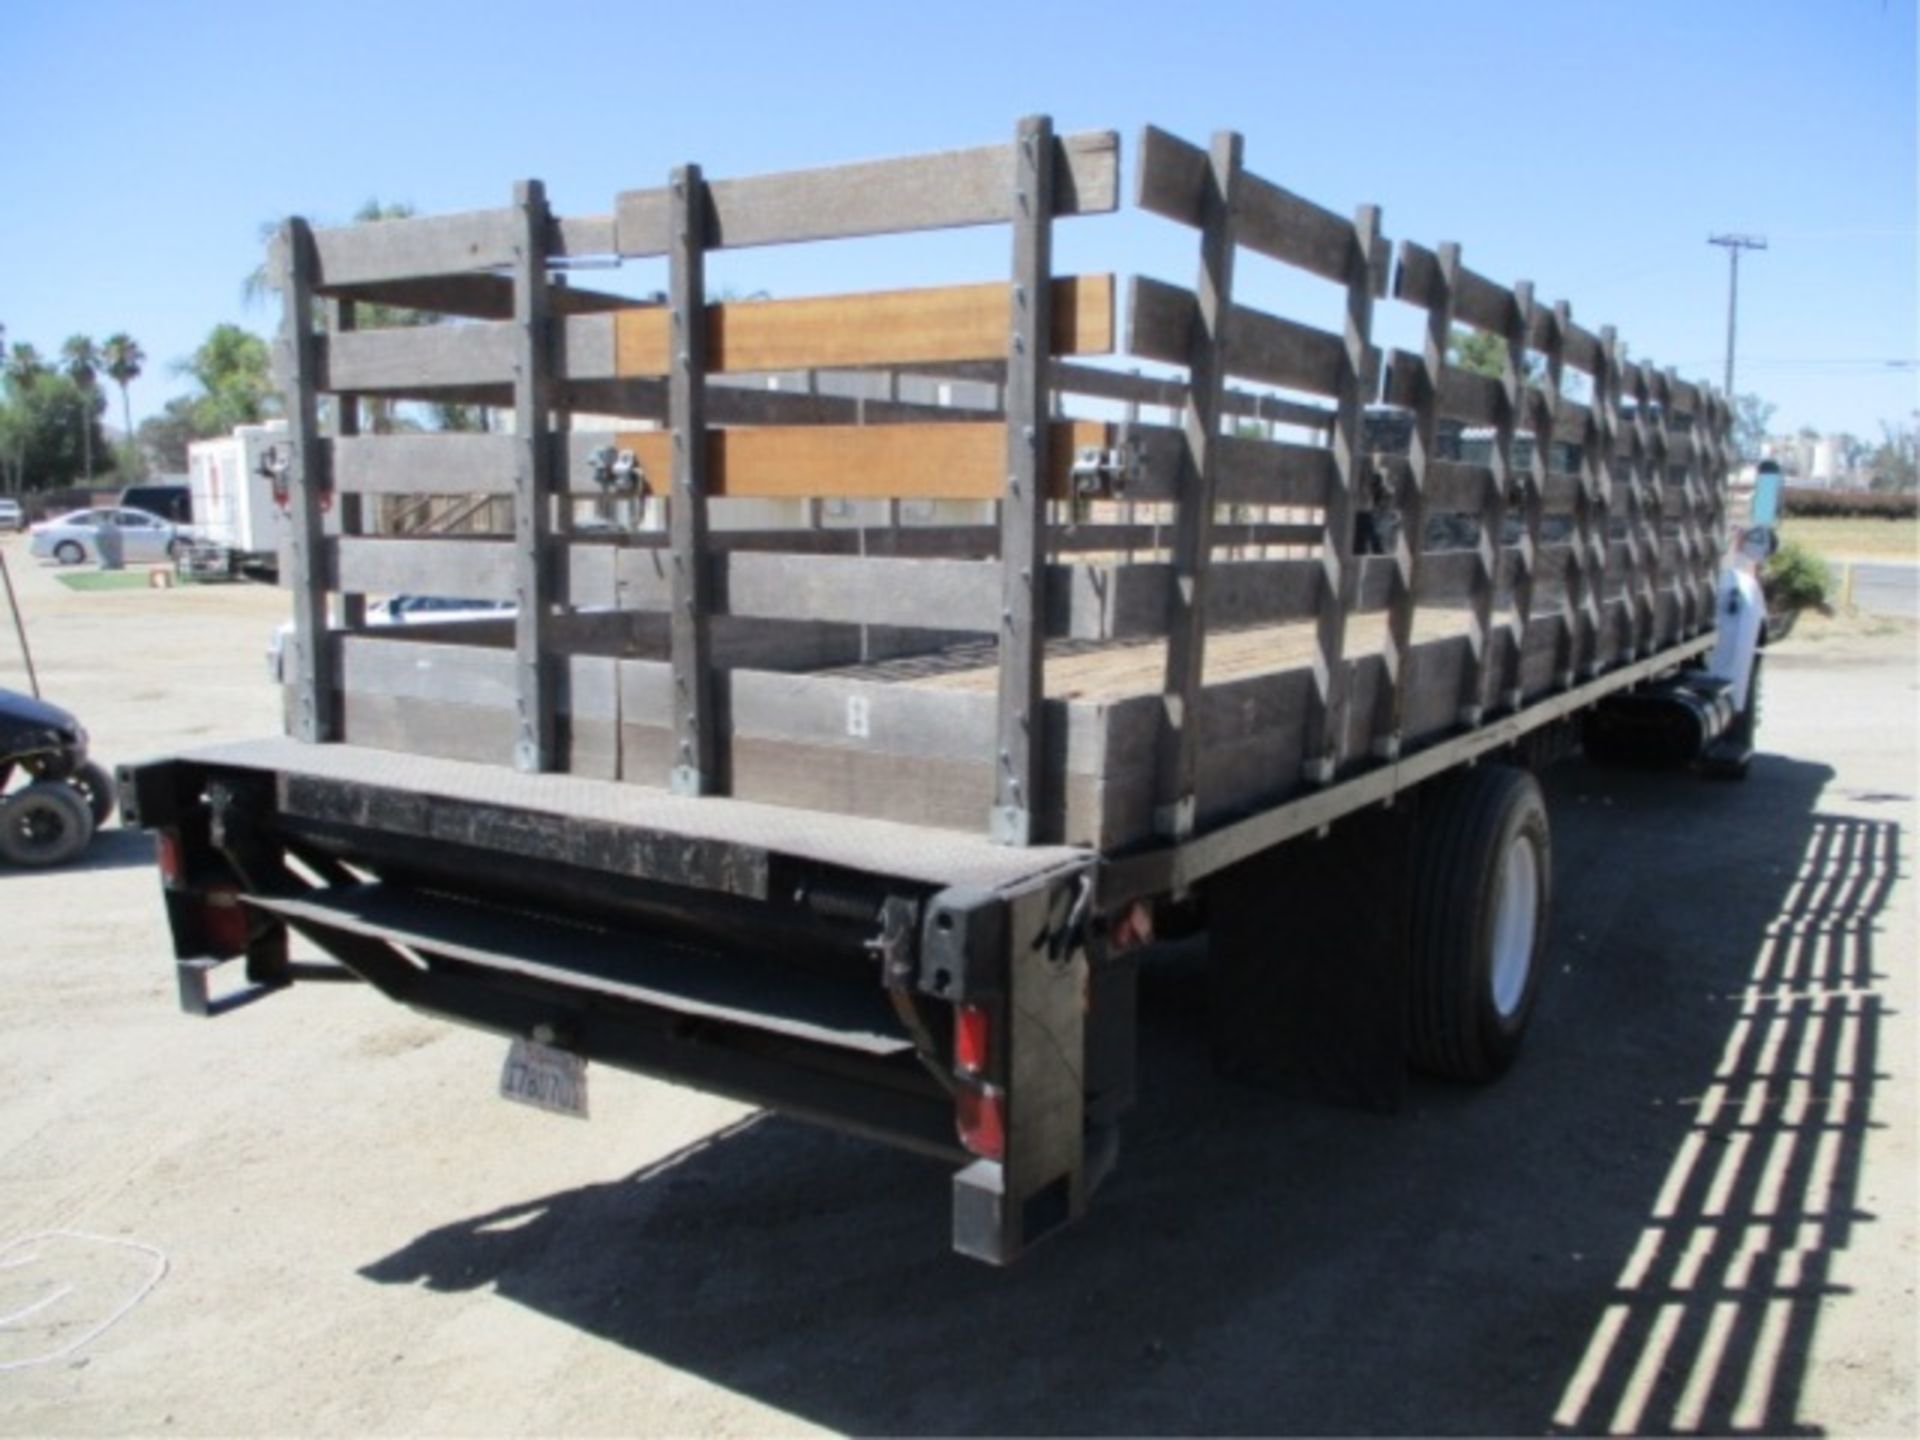 2005 Ford F650 S/A Flatbed Stakebed Truck, Cat C7 Acert 7.2L 6-Cyl Diesel, Automatic, Lift Gate, 24' - Image 13 of 61